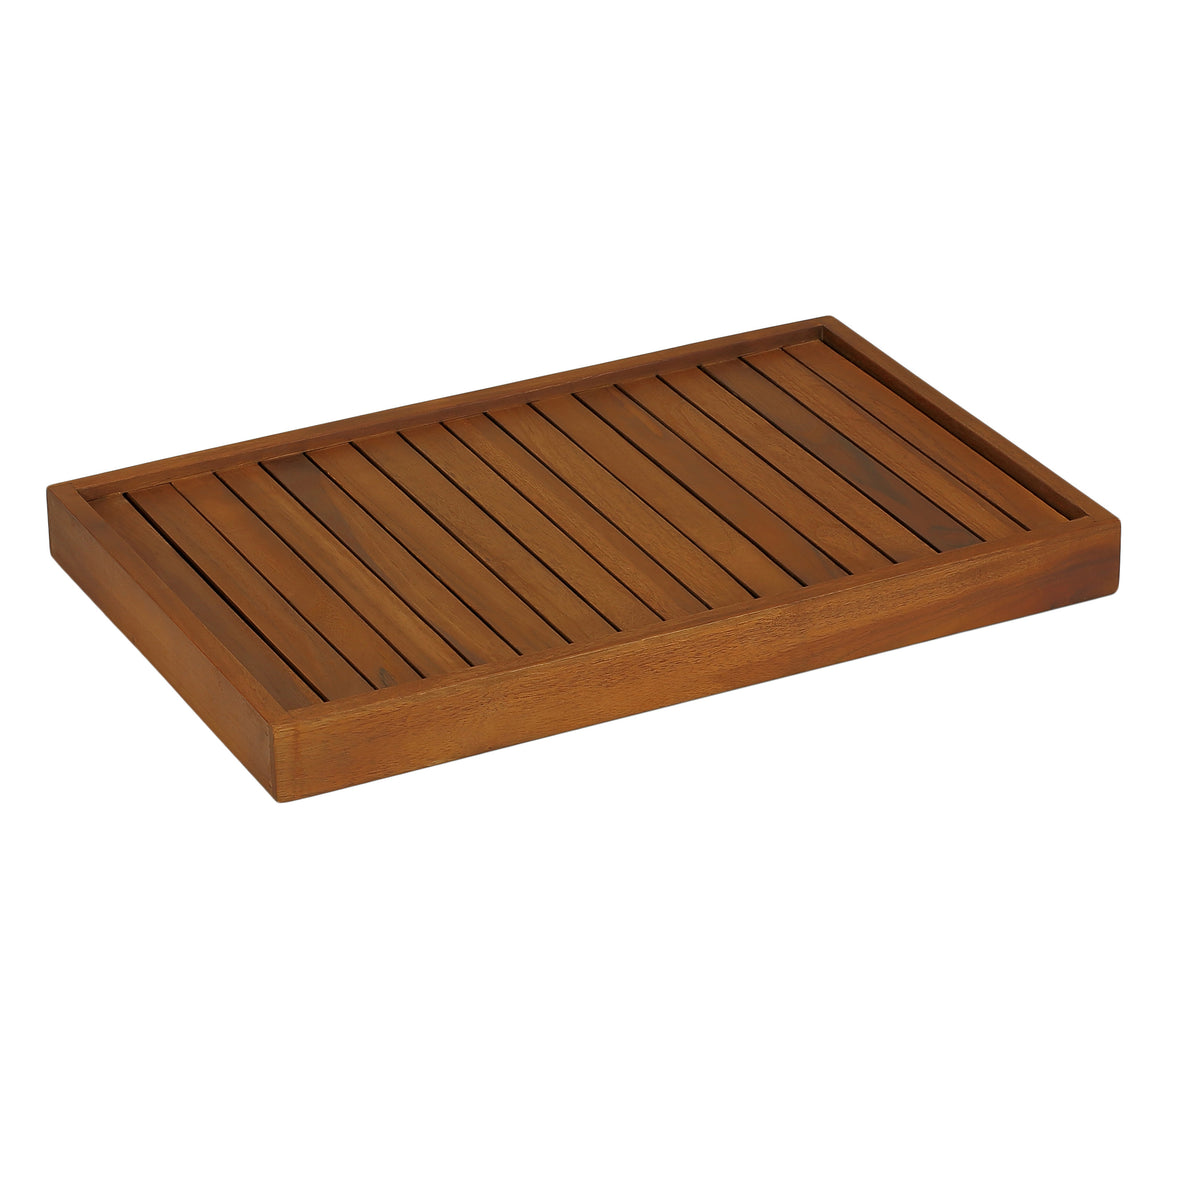 Bare Decor Coco Bed Tray Table in Solid Teak Wood – BareDecor